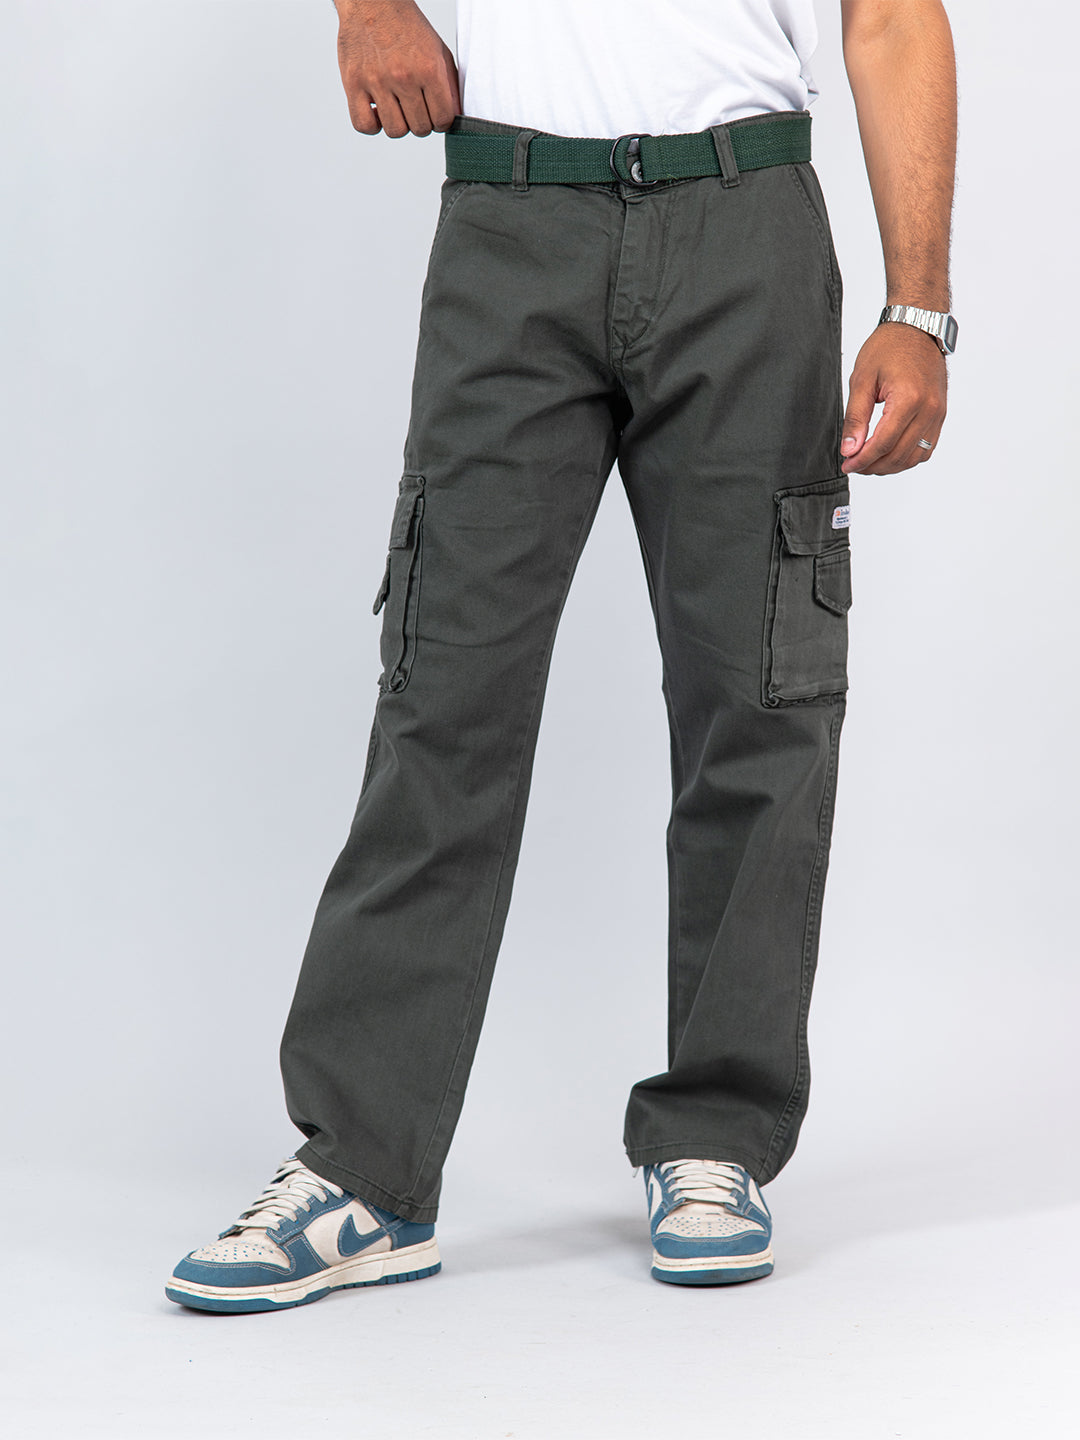 Men's Pants & Chinos | Abercrombie & Fitch